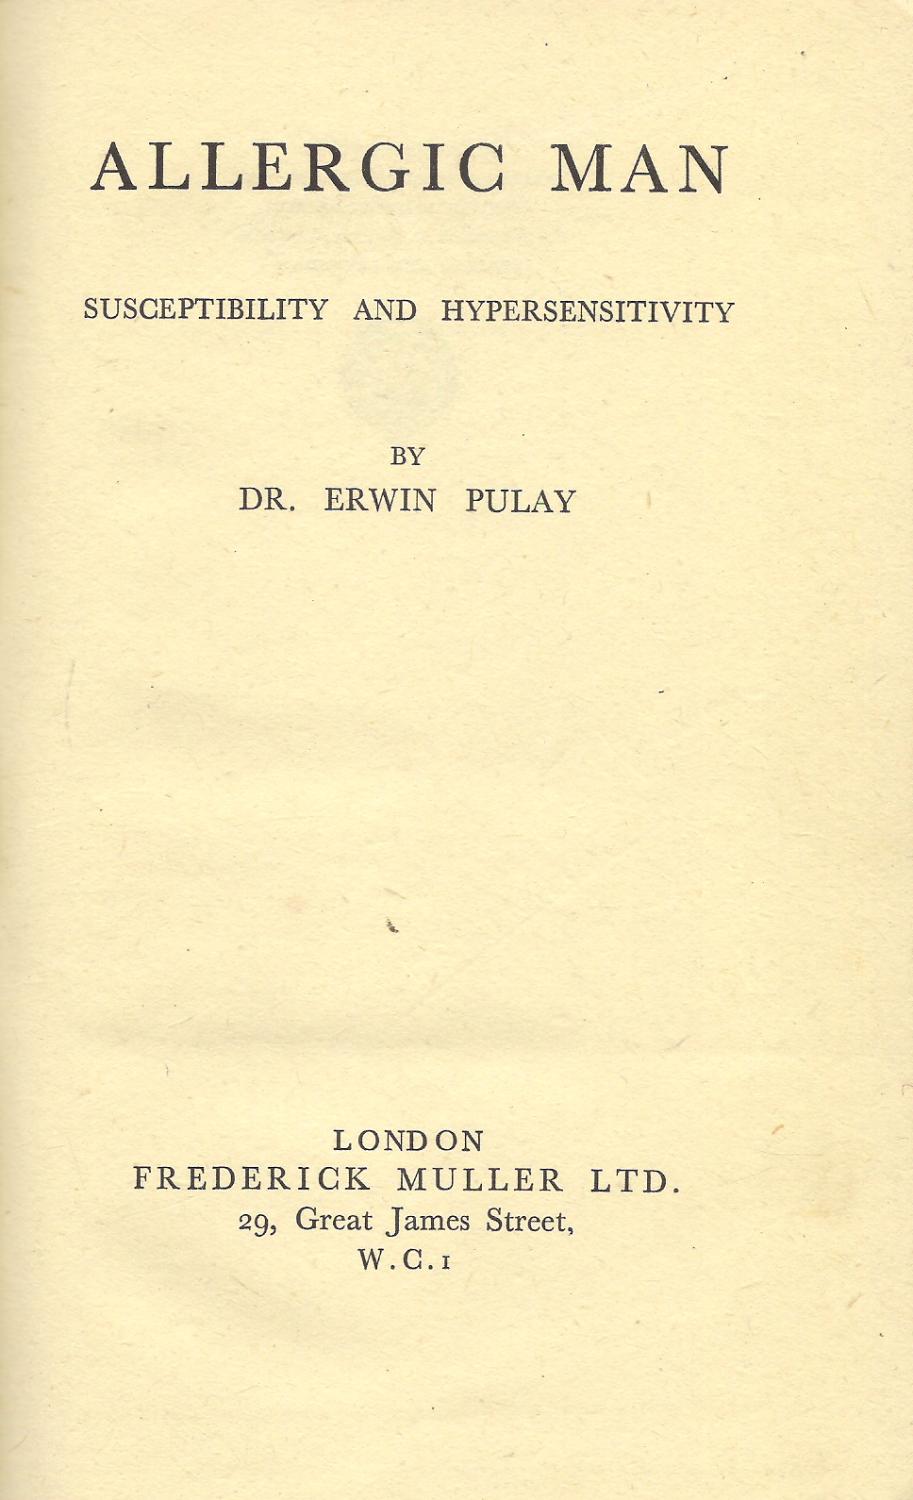 Allergic Man – Susceptibility and Hypersensitivity, 1945